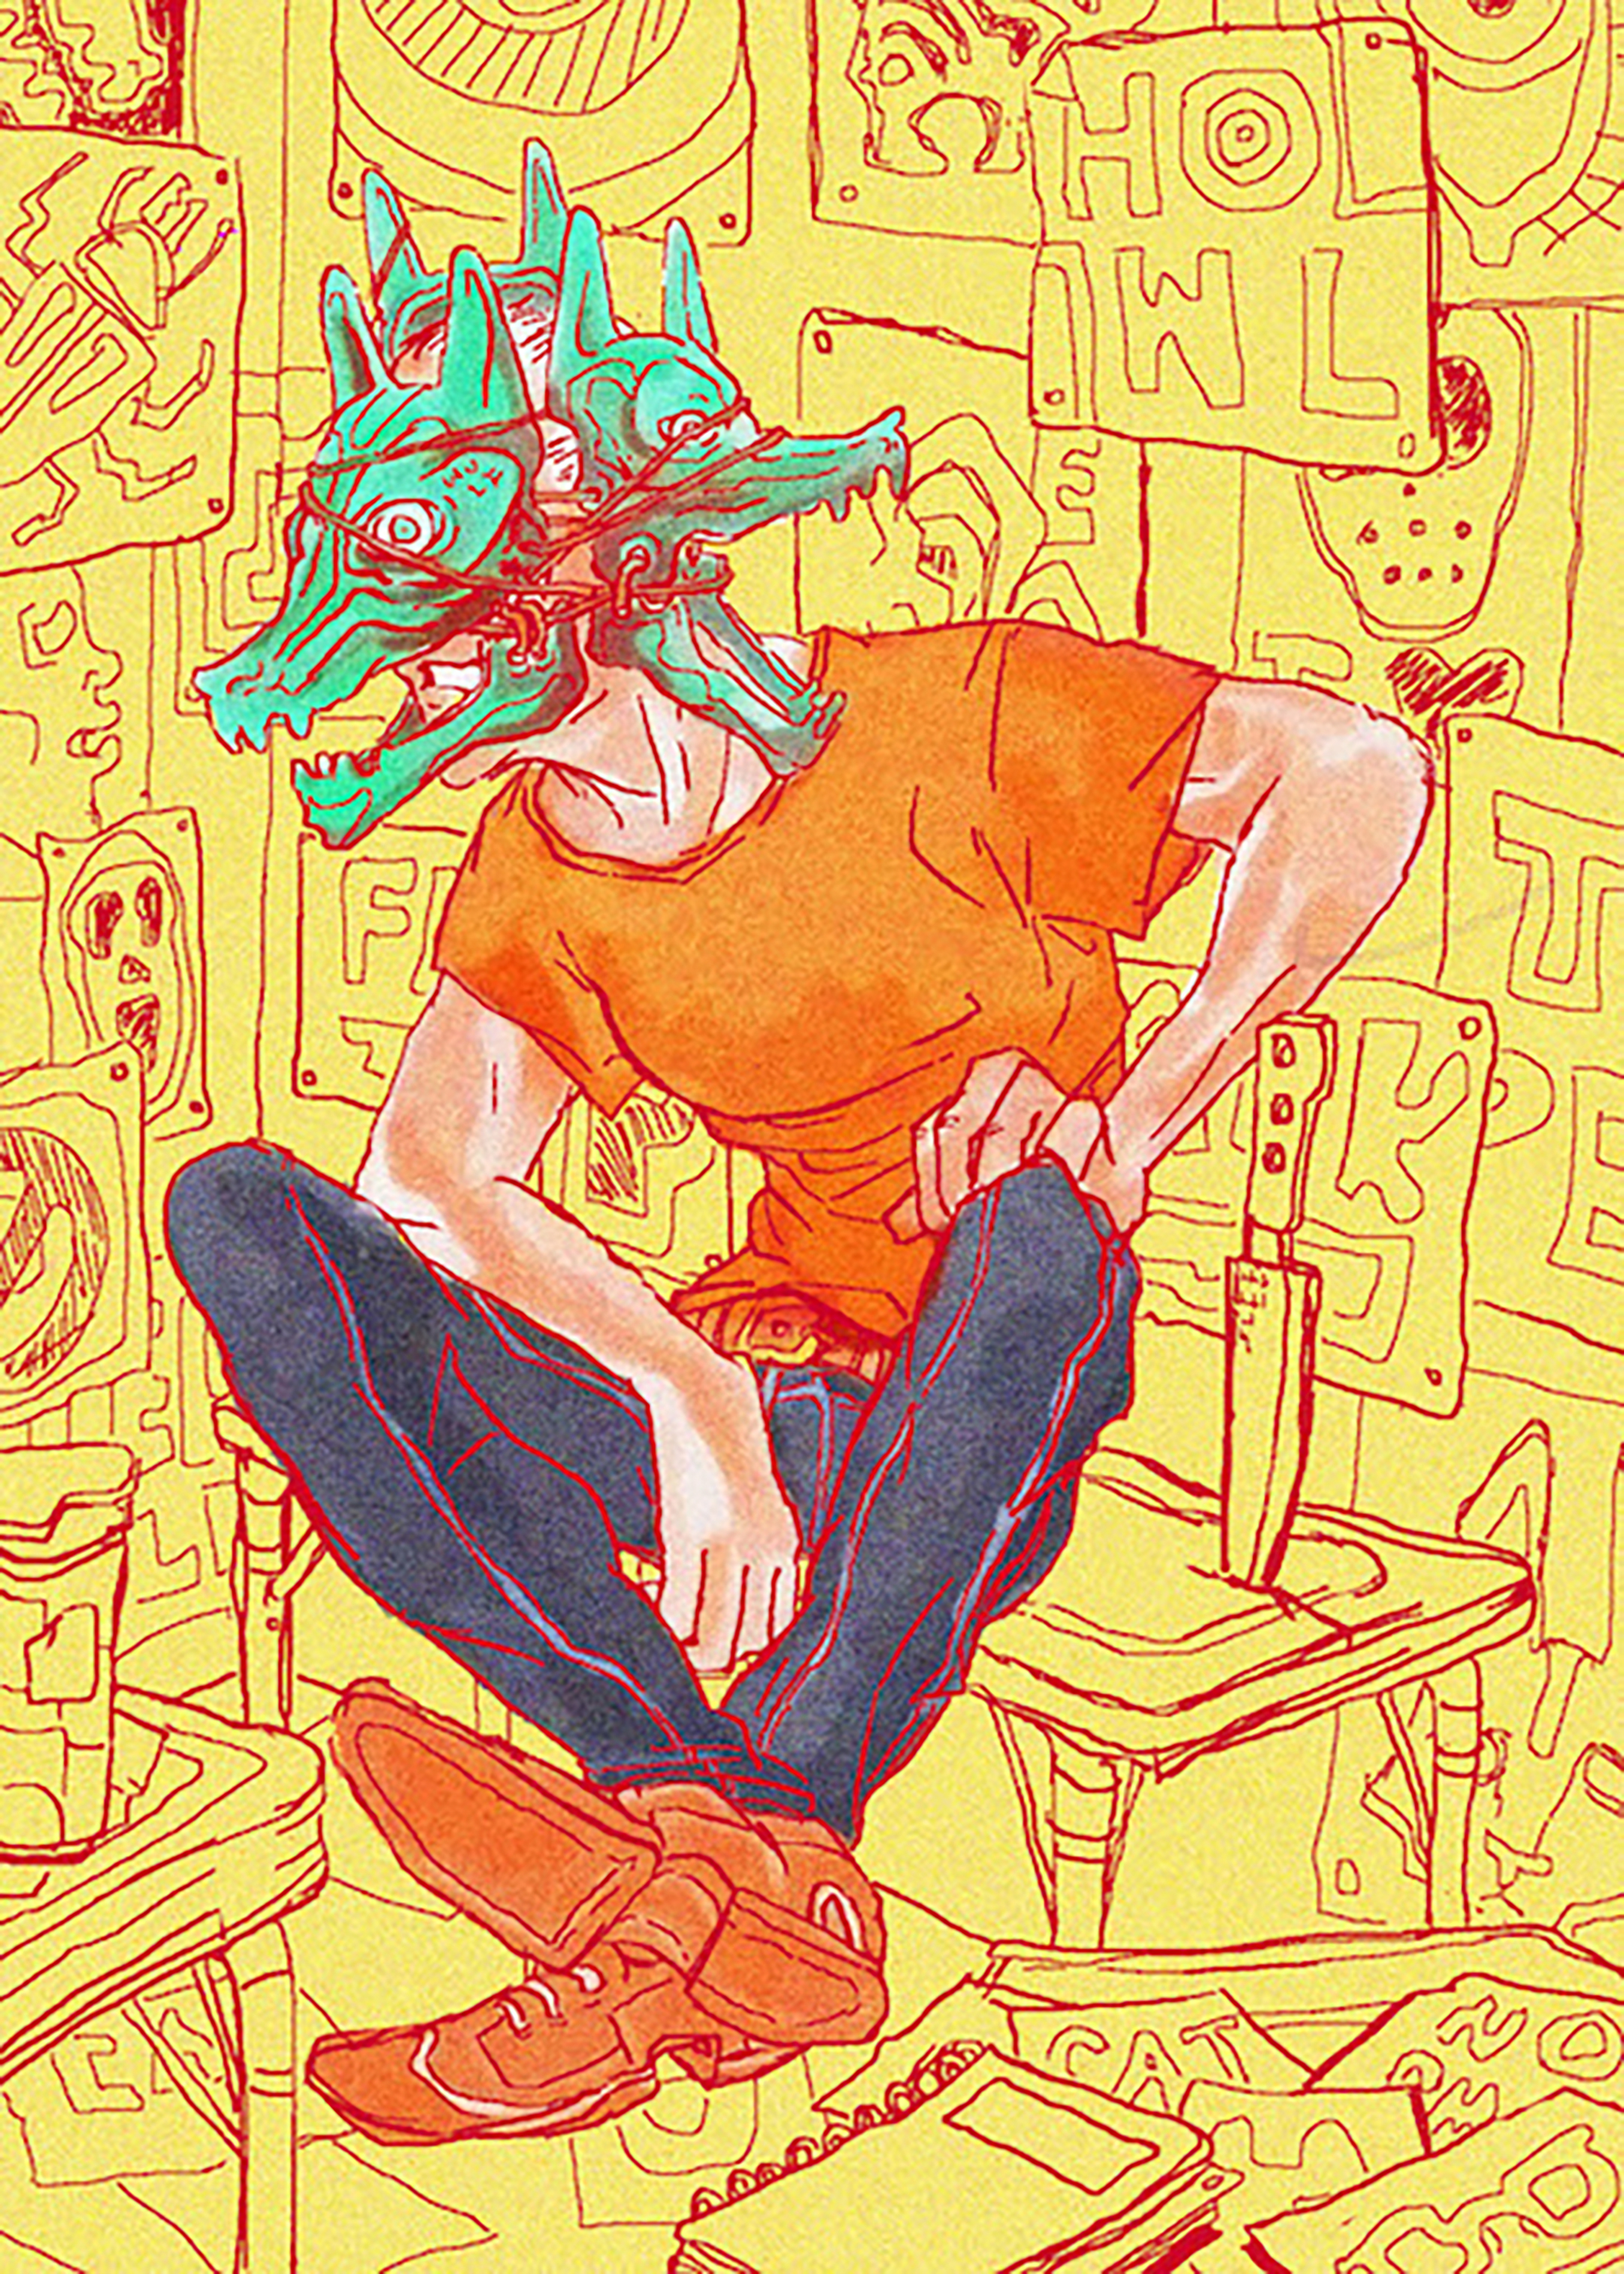 art in a comic book style featuring a young man seated on a stool wearing a green wolf mask and orange t-shirt and blue jeans against a yellow background